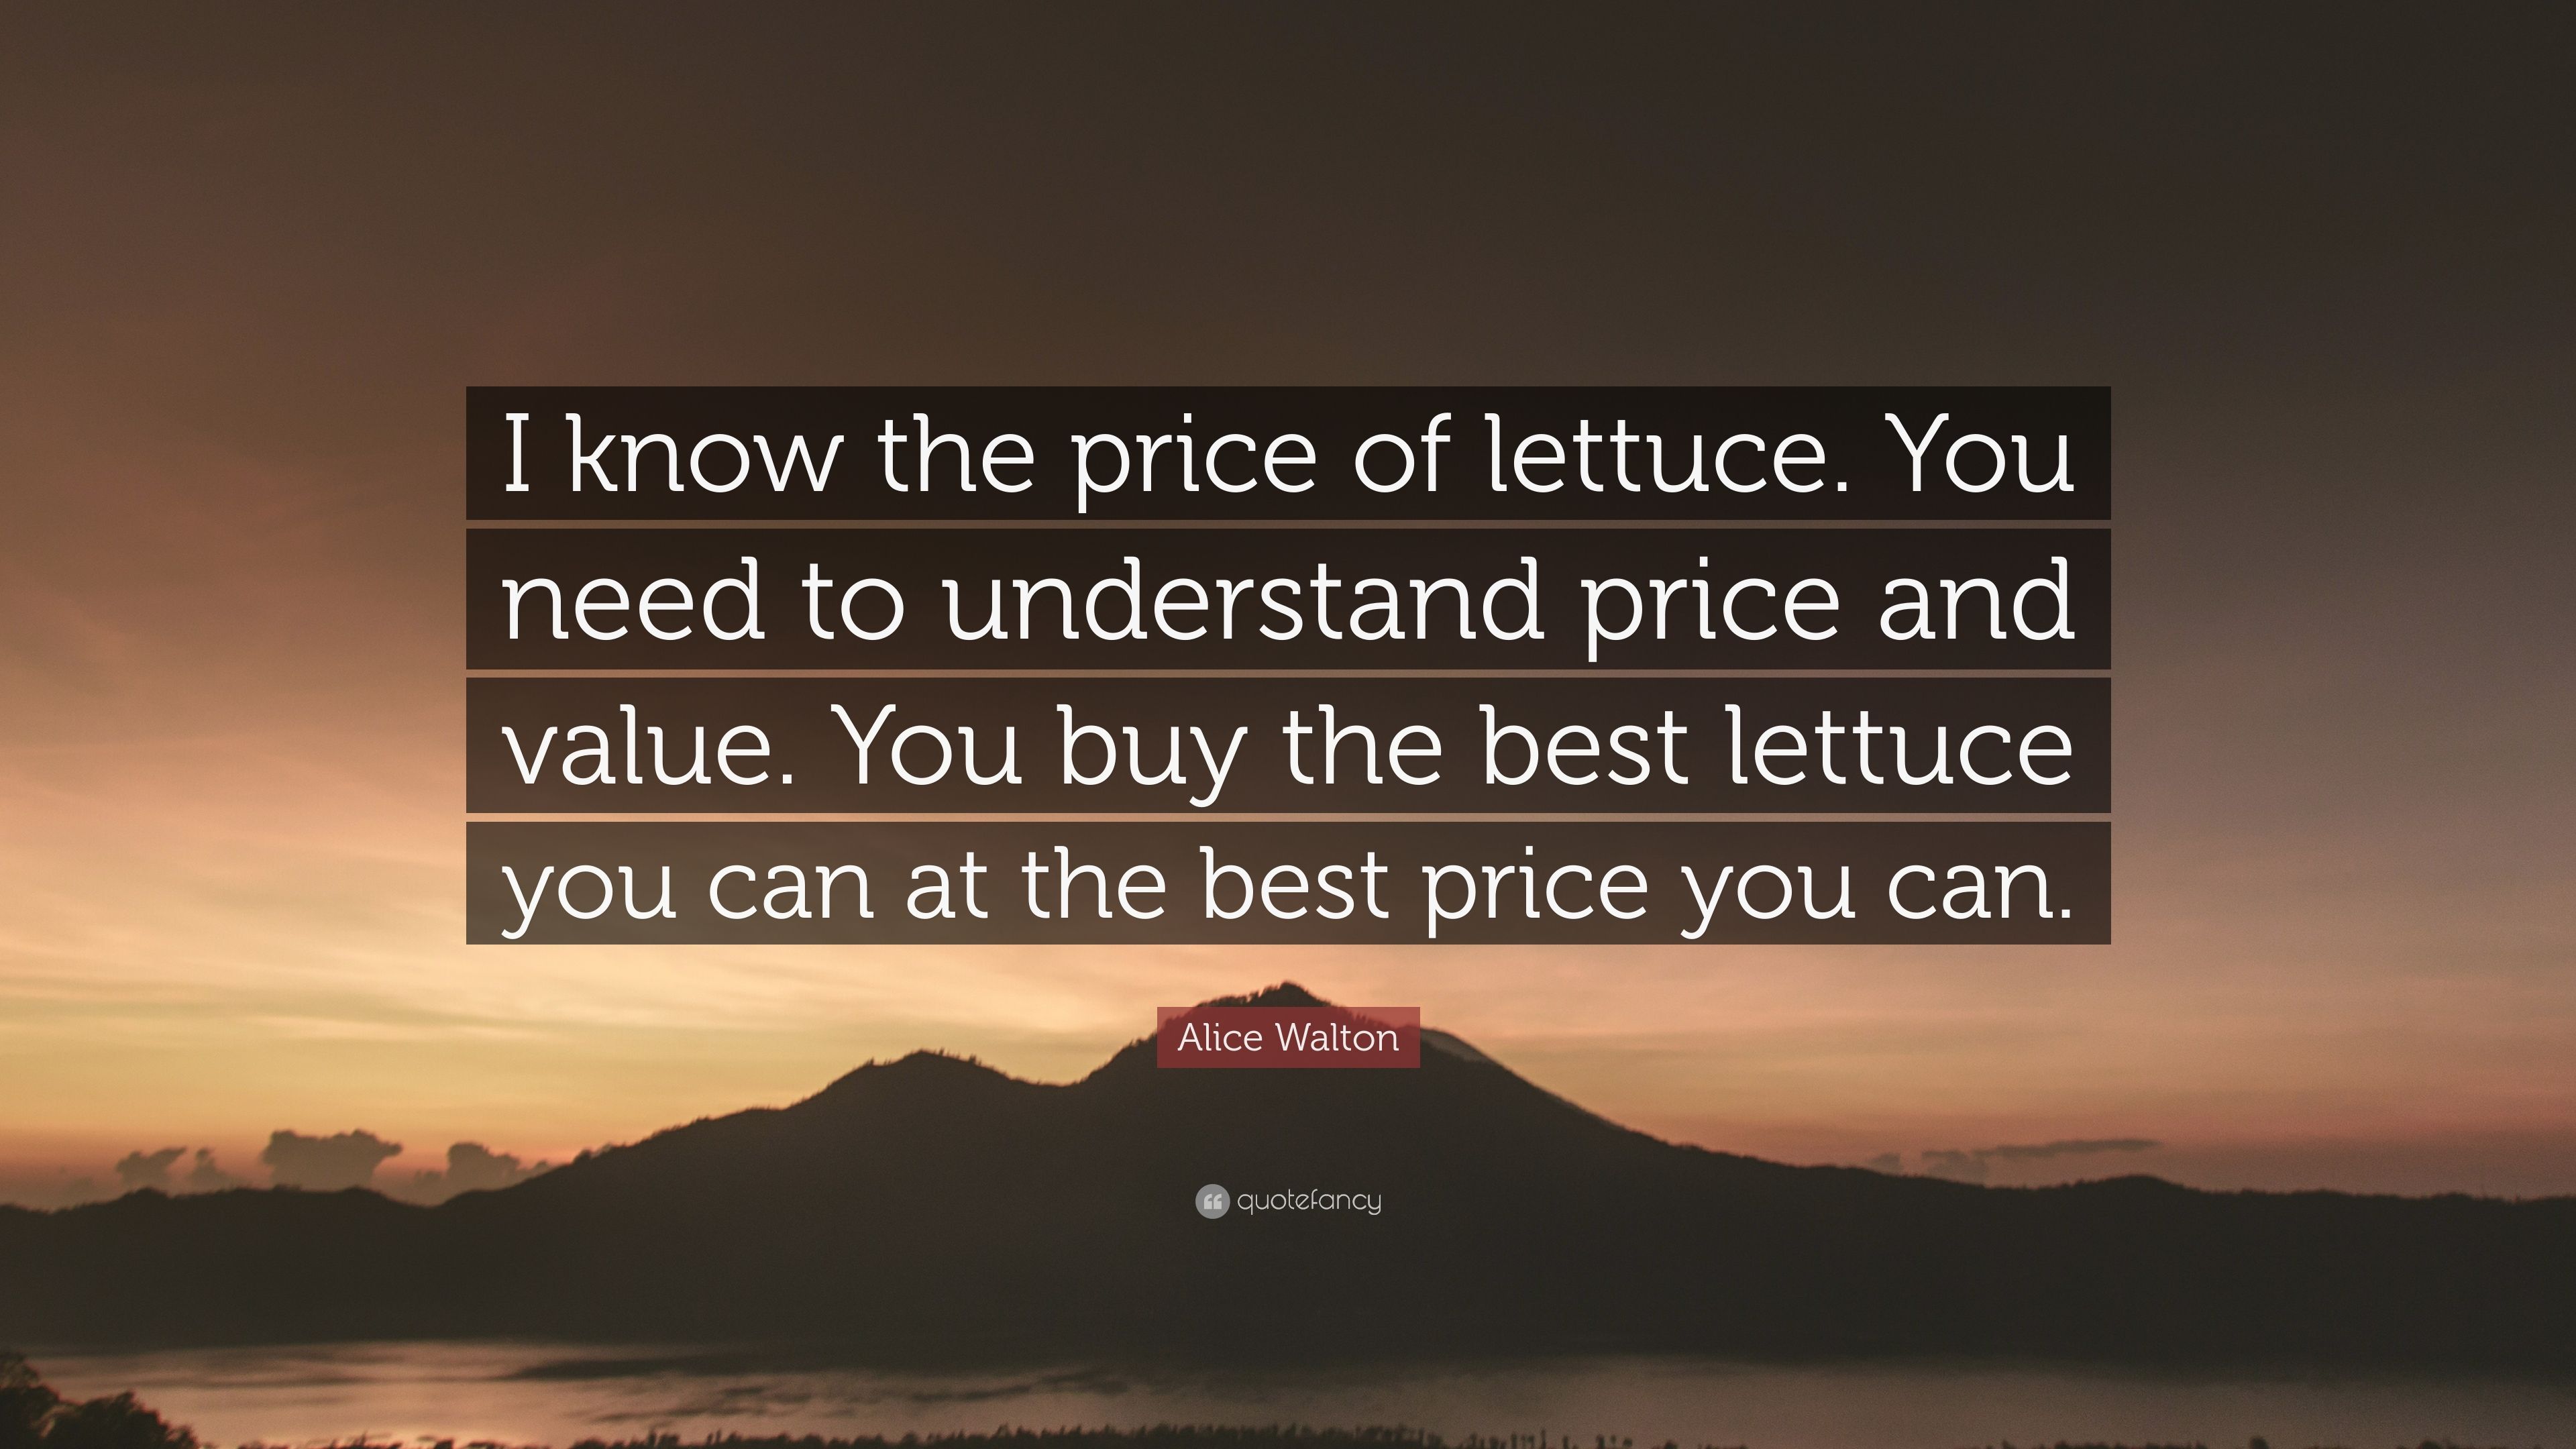 Alice Walton Quote: “I know the price of lettuce. You need to